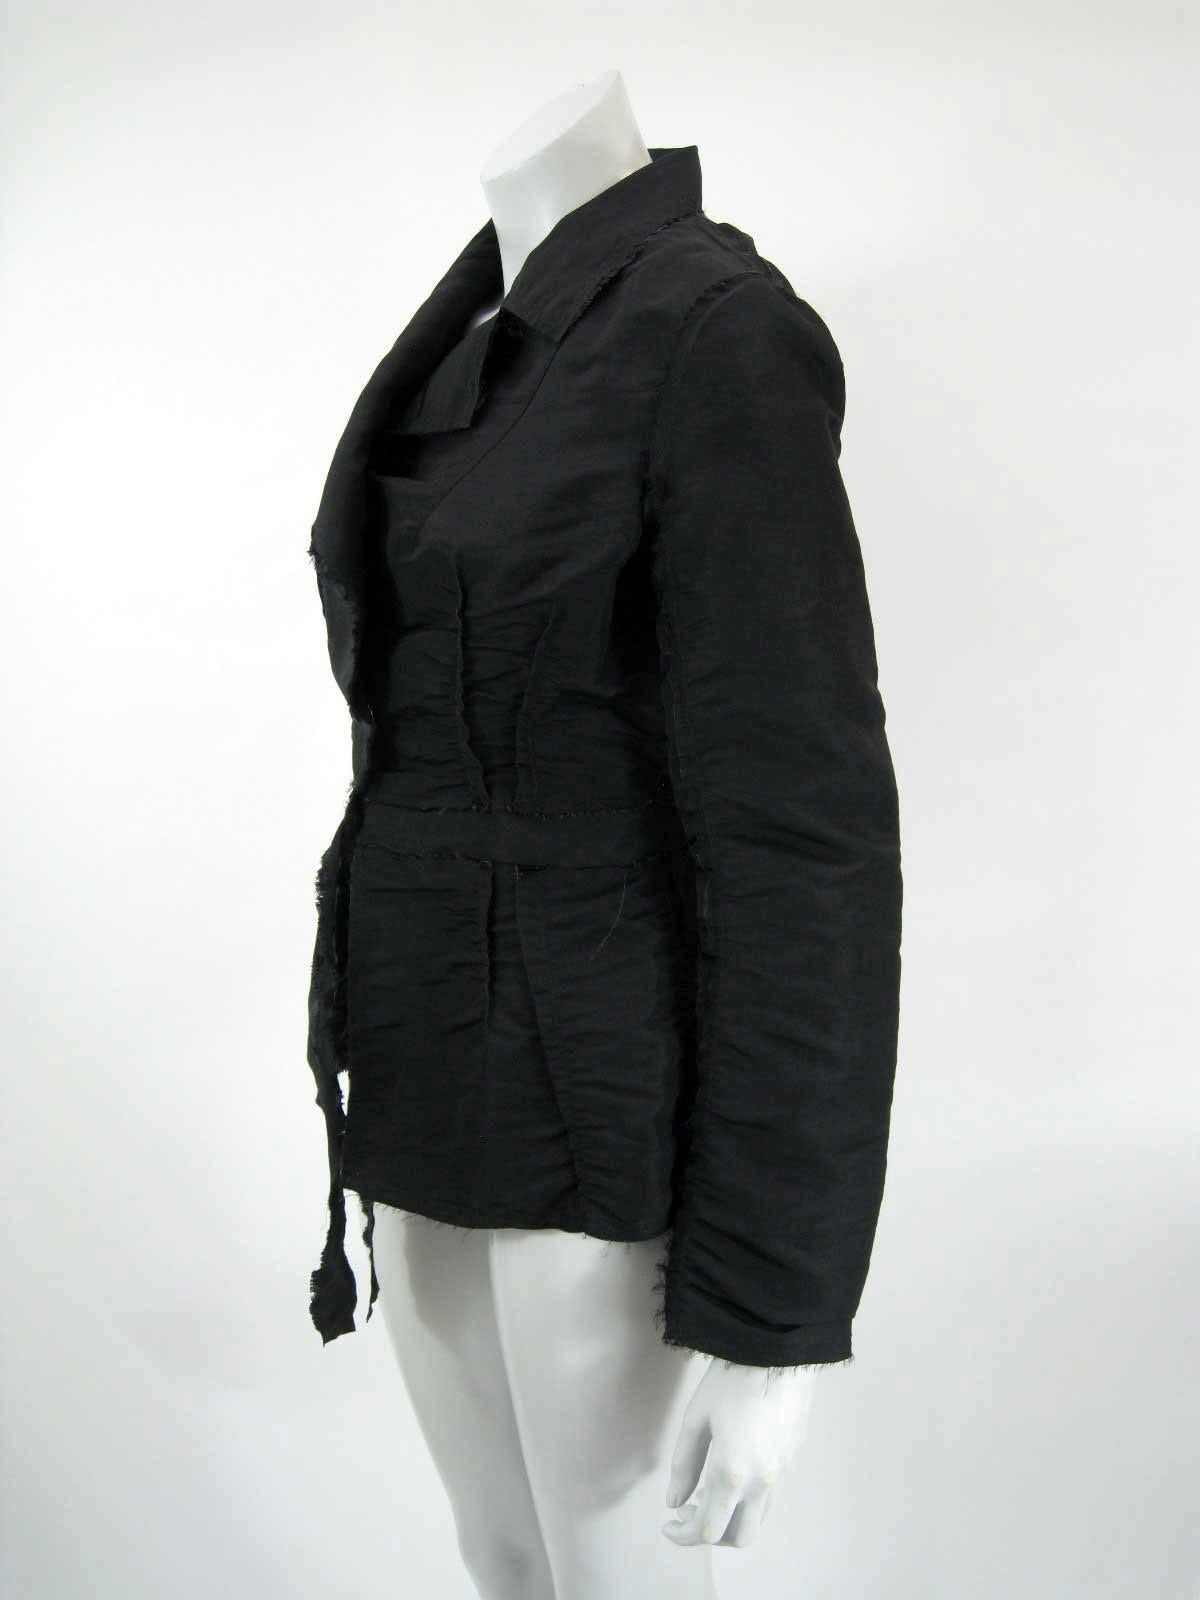 Lanvin 2005 Textured Taffeta Frayed Silk Wrap Jacket In Excellent Condition In Oakland, CA